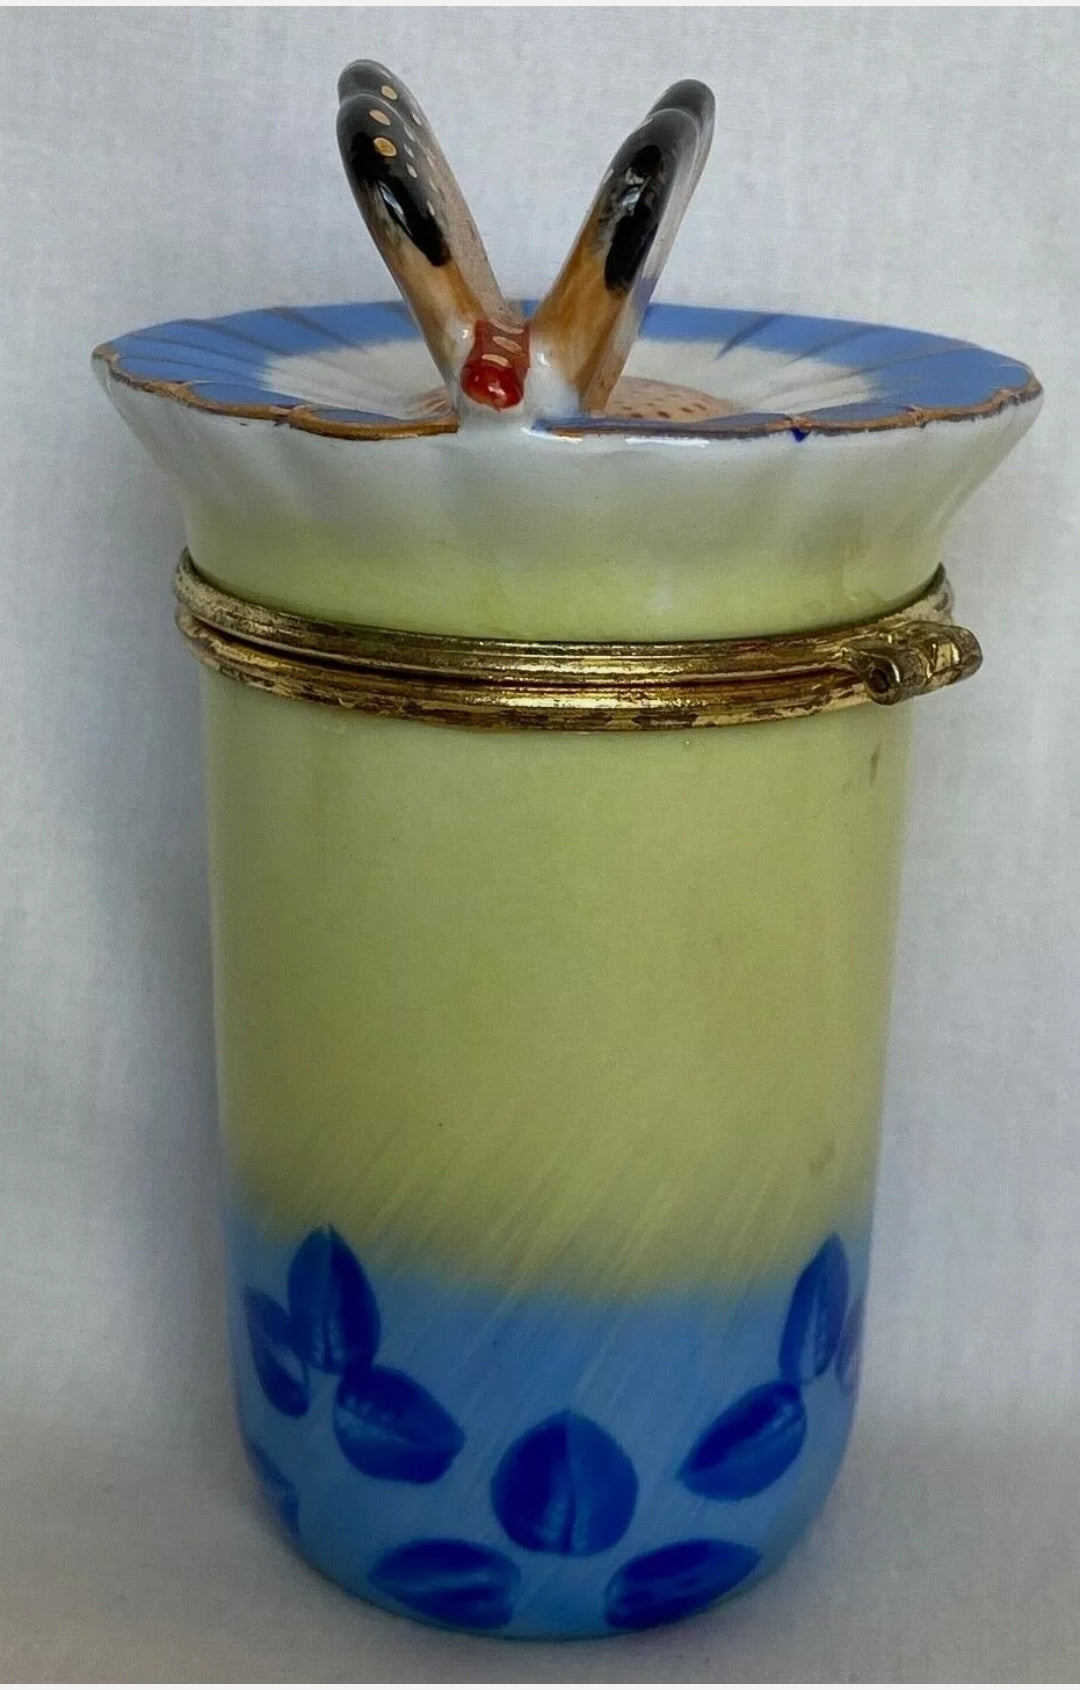 Adorable Butterfly Flower Porcelain Trinket Box Candle Holder by Bombay Company